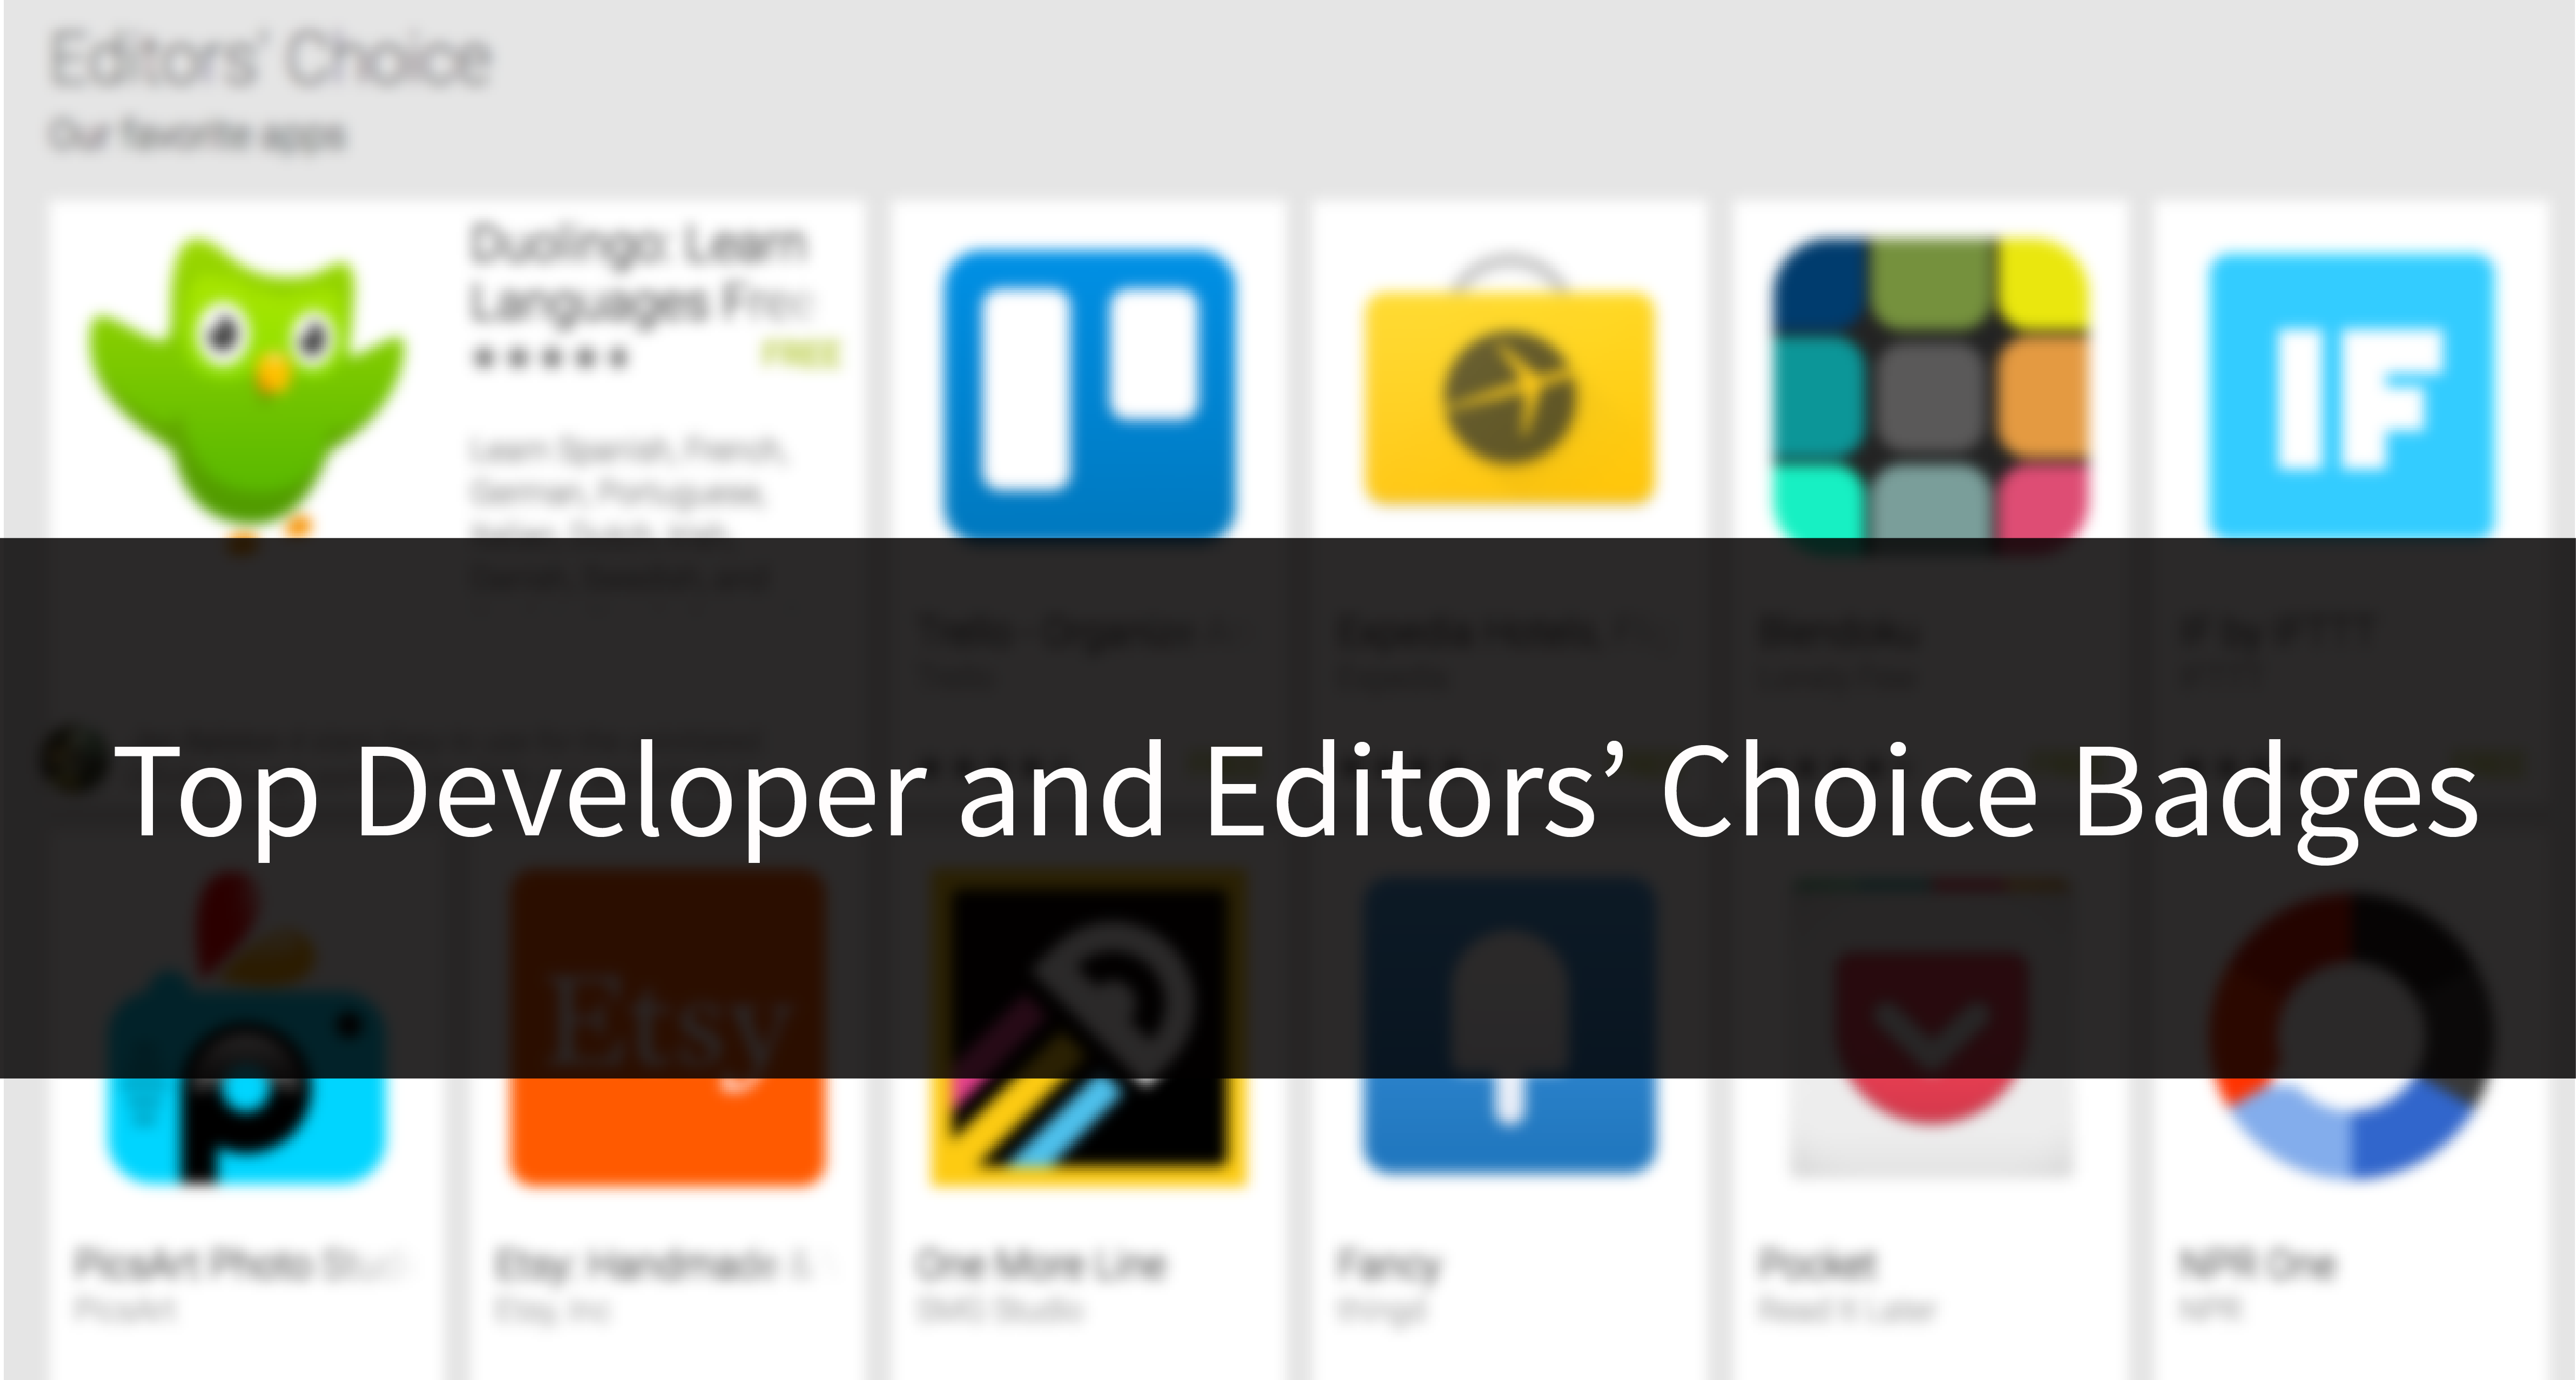 How Top Developer and Editors' Choice Badges Showcase Google’s Favorite Apps